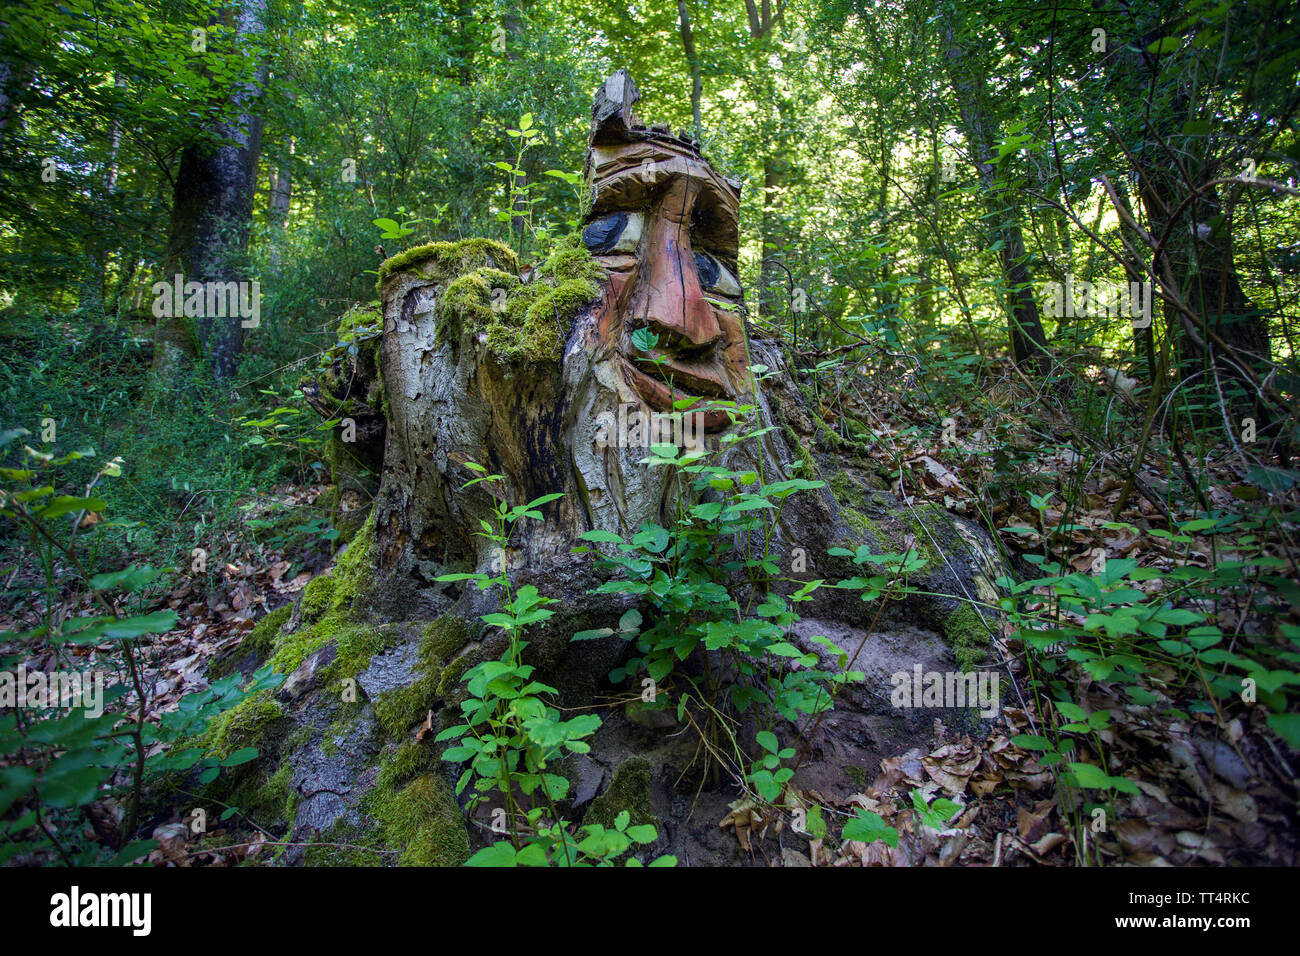 Carved face in a tree trunk, forest ghosts trail (german: Waldgeisterweg), Oberotterbach, German Wine Route, Rhineland-Palatinate, Germany Stock Photo